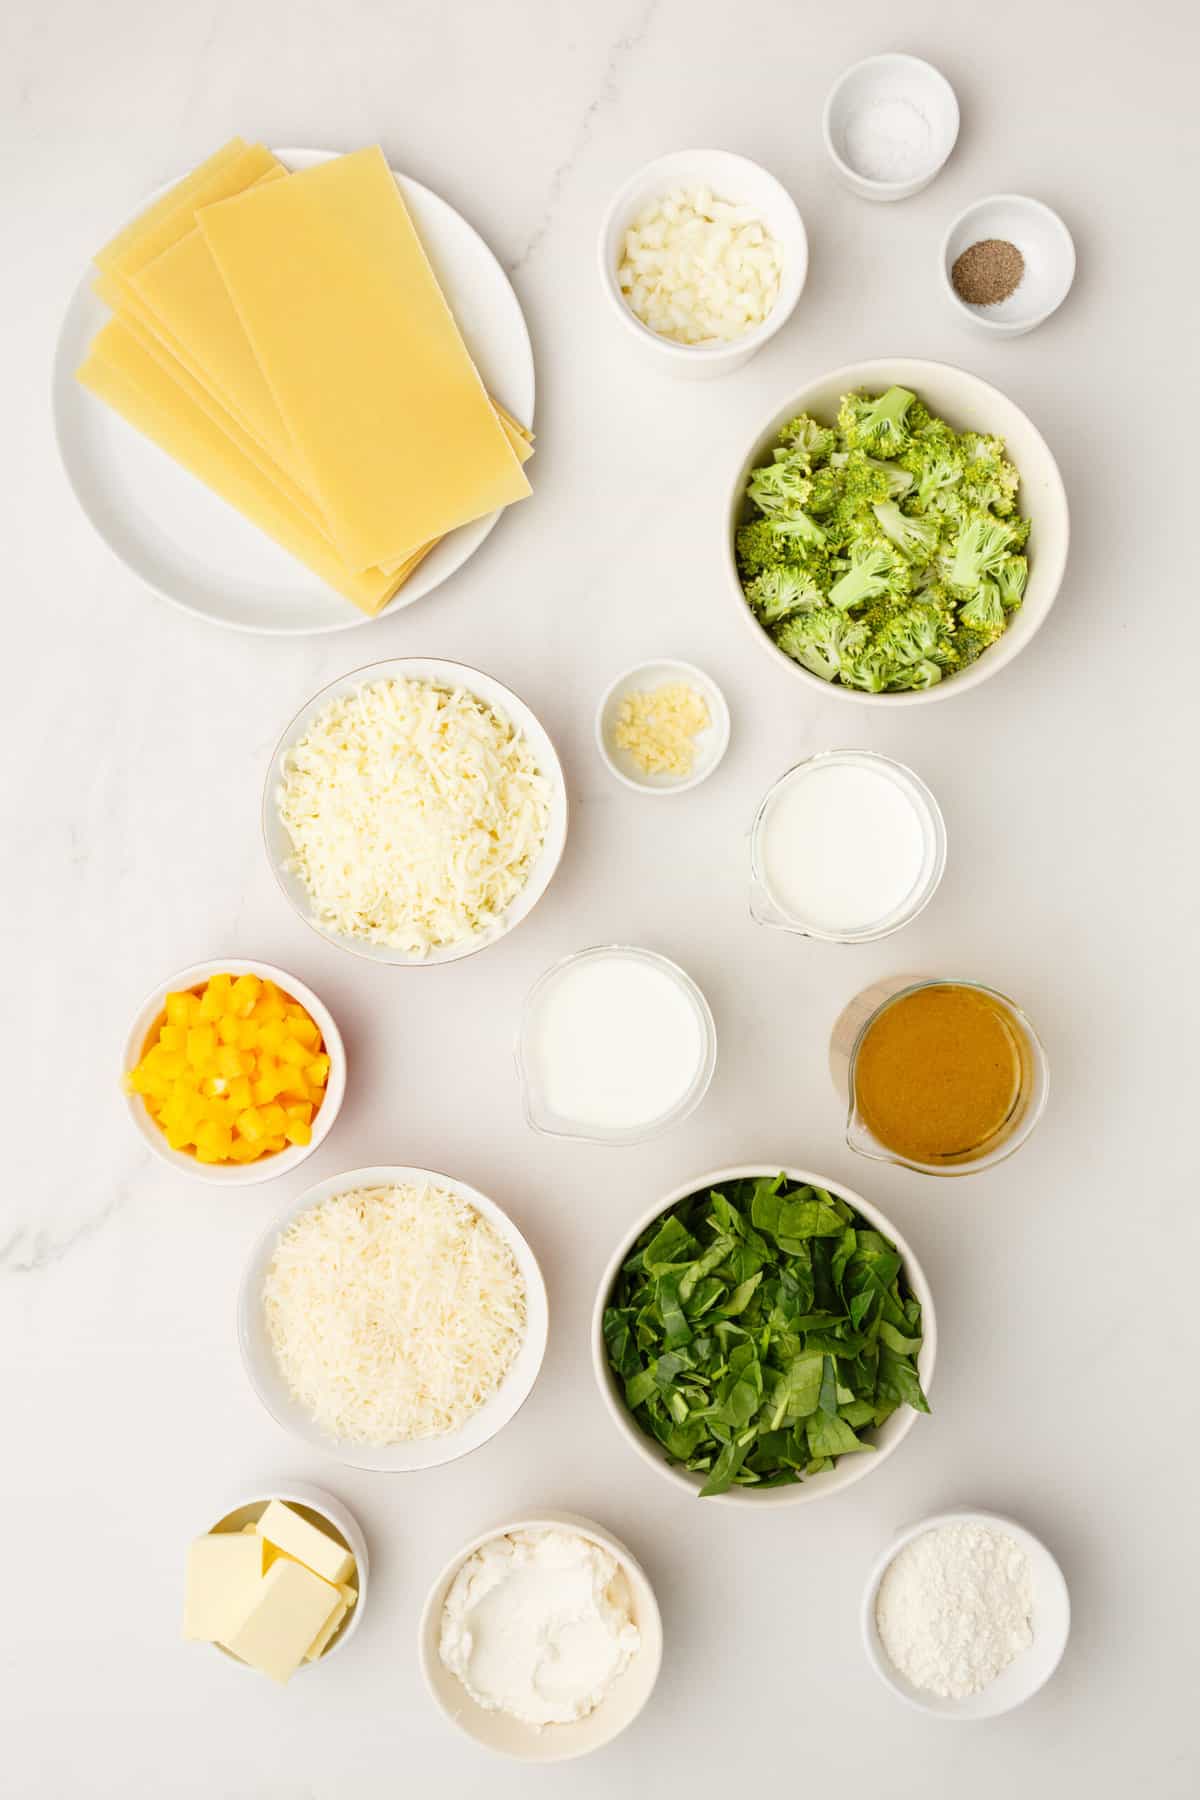 Ingredients to make easy, vegetable lasagna with white sauce.